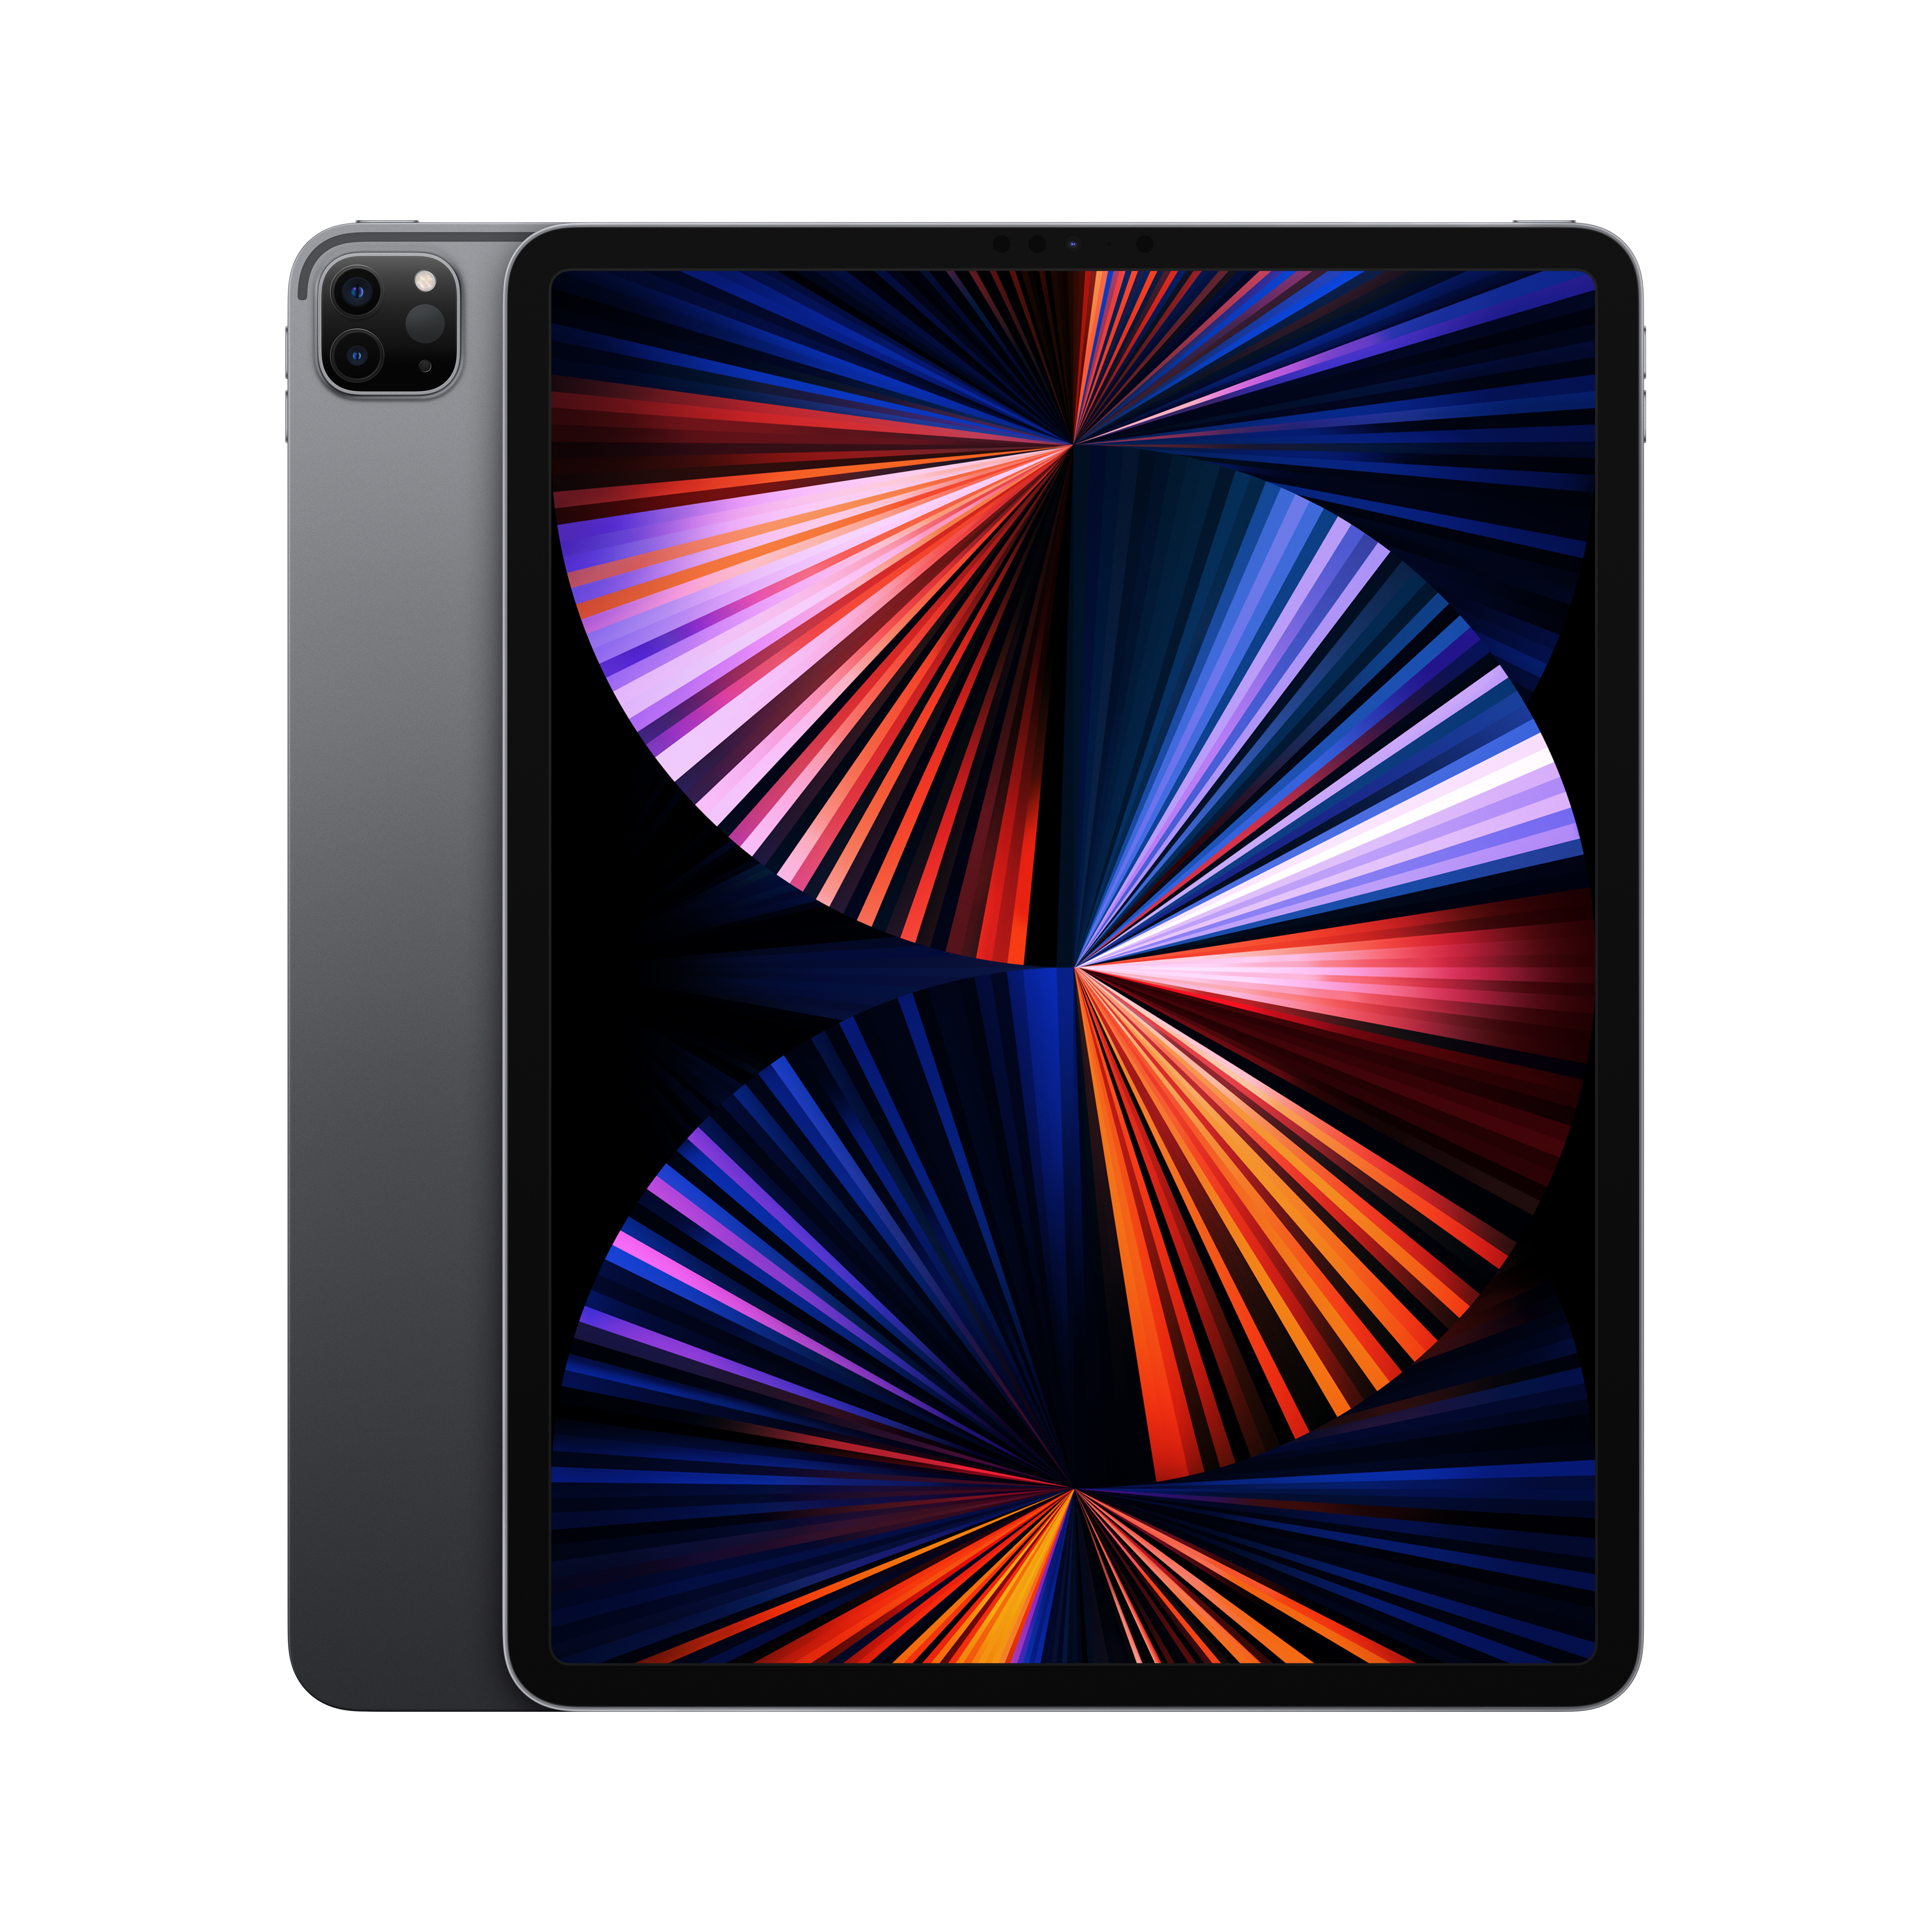 2021 Apple 12.9-inch iPad Pro Wi-Fi + Cellular 1TB - Space Gray (5th Generation) - image 1 of 9